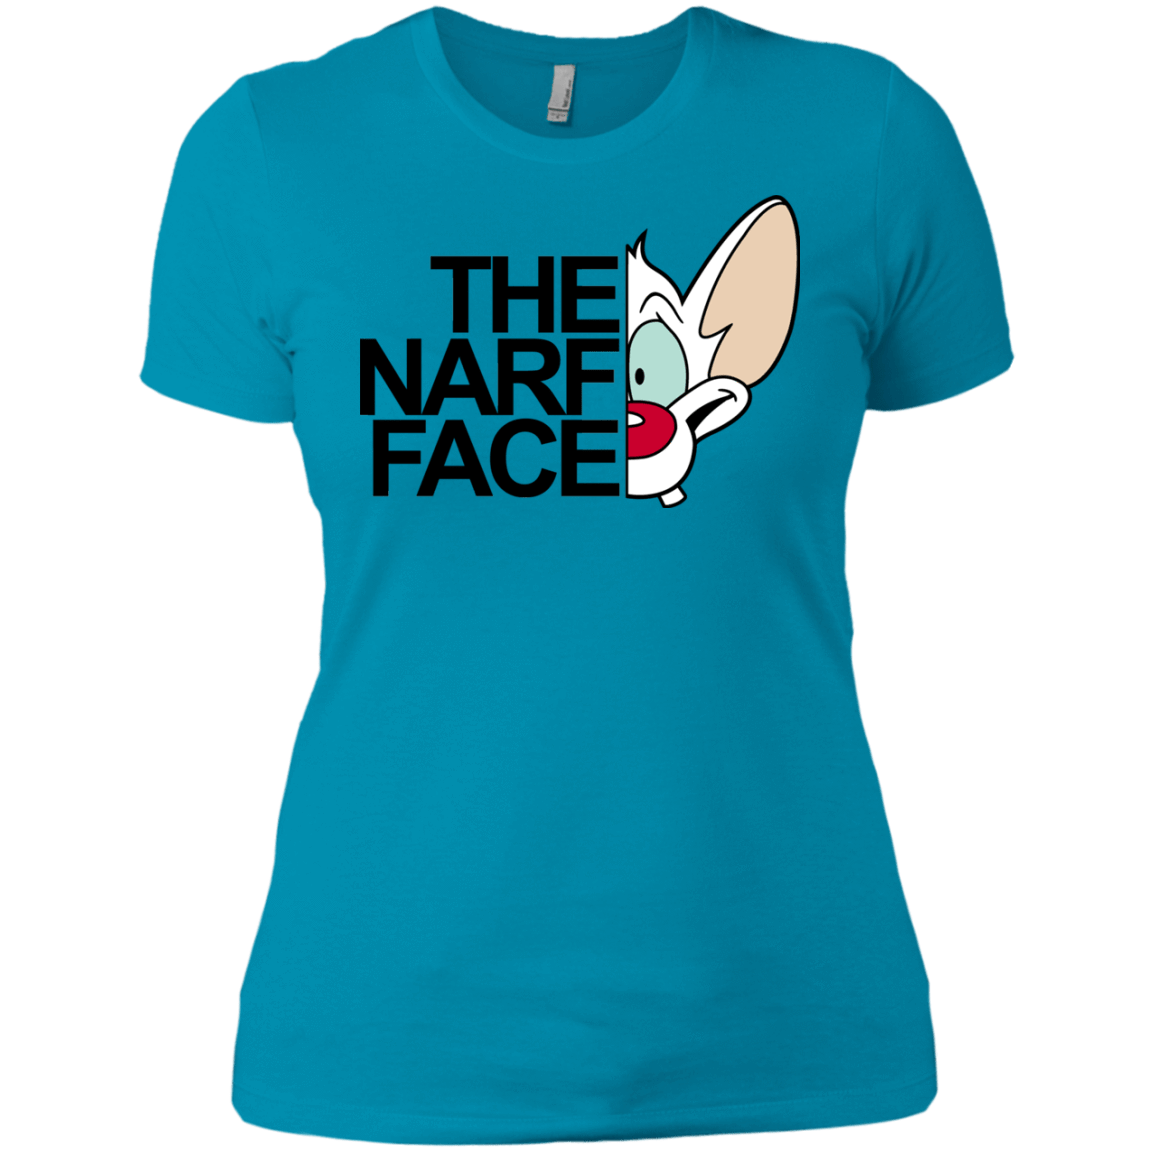 T-Shirts Turquoise / X-Small The Narf Face Women's Premium T-Shirt